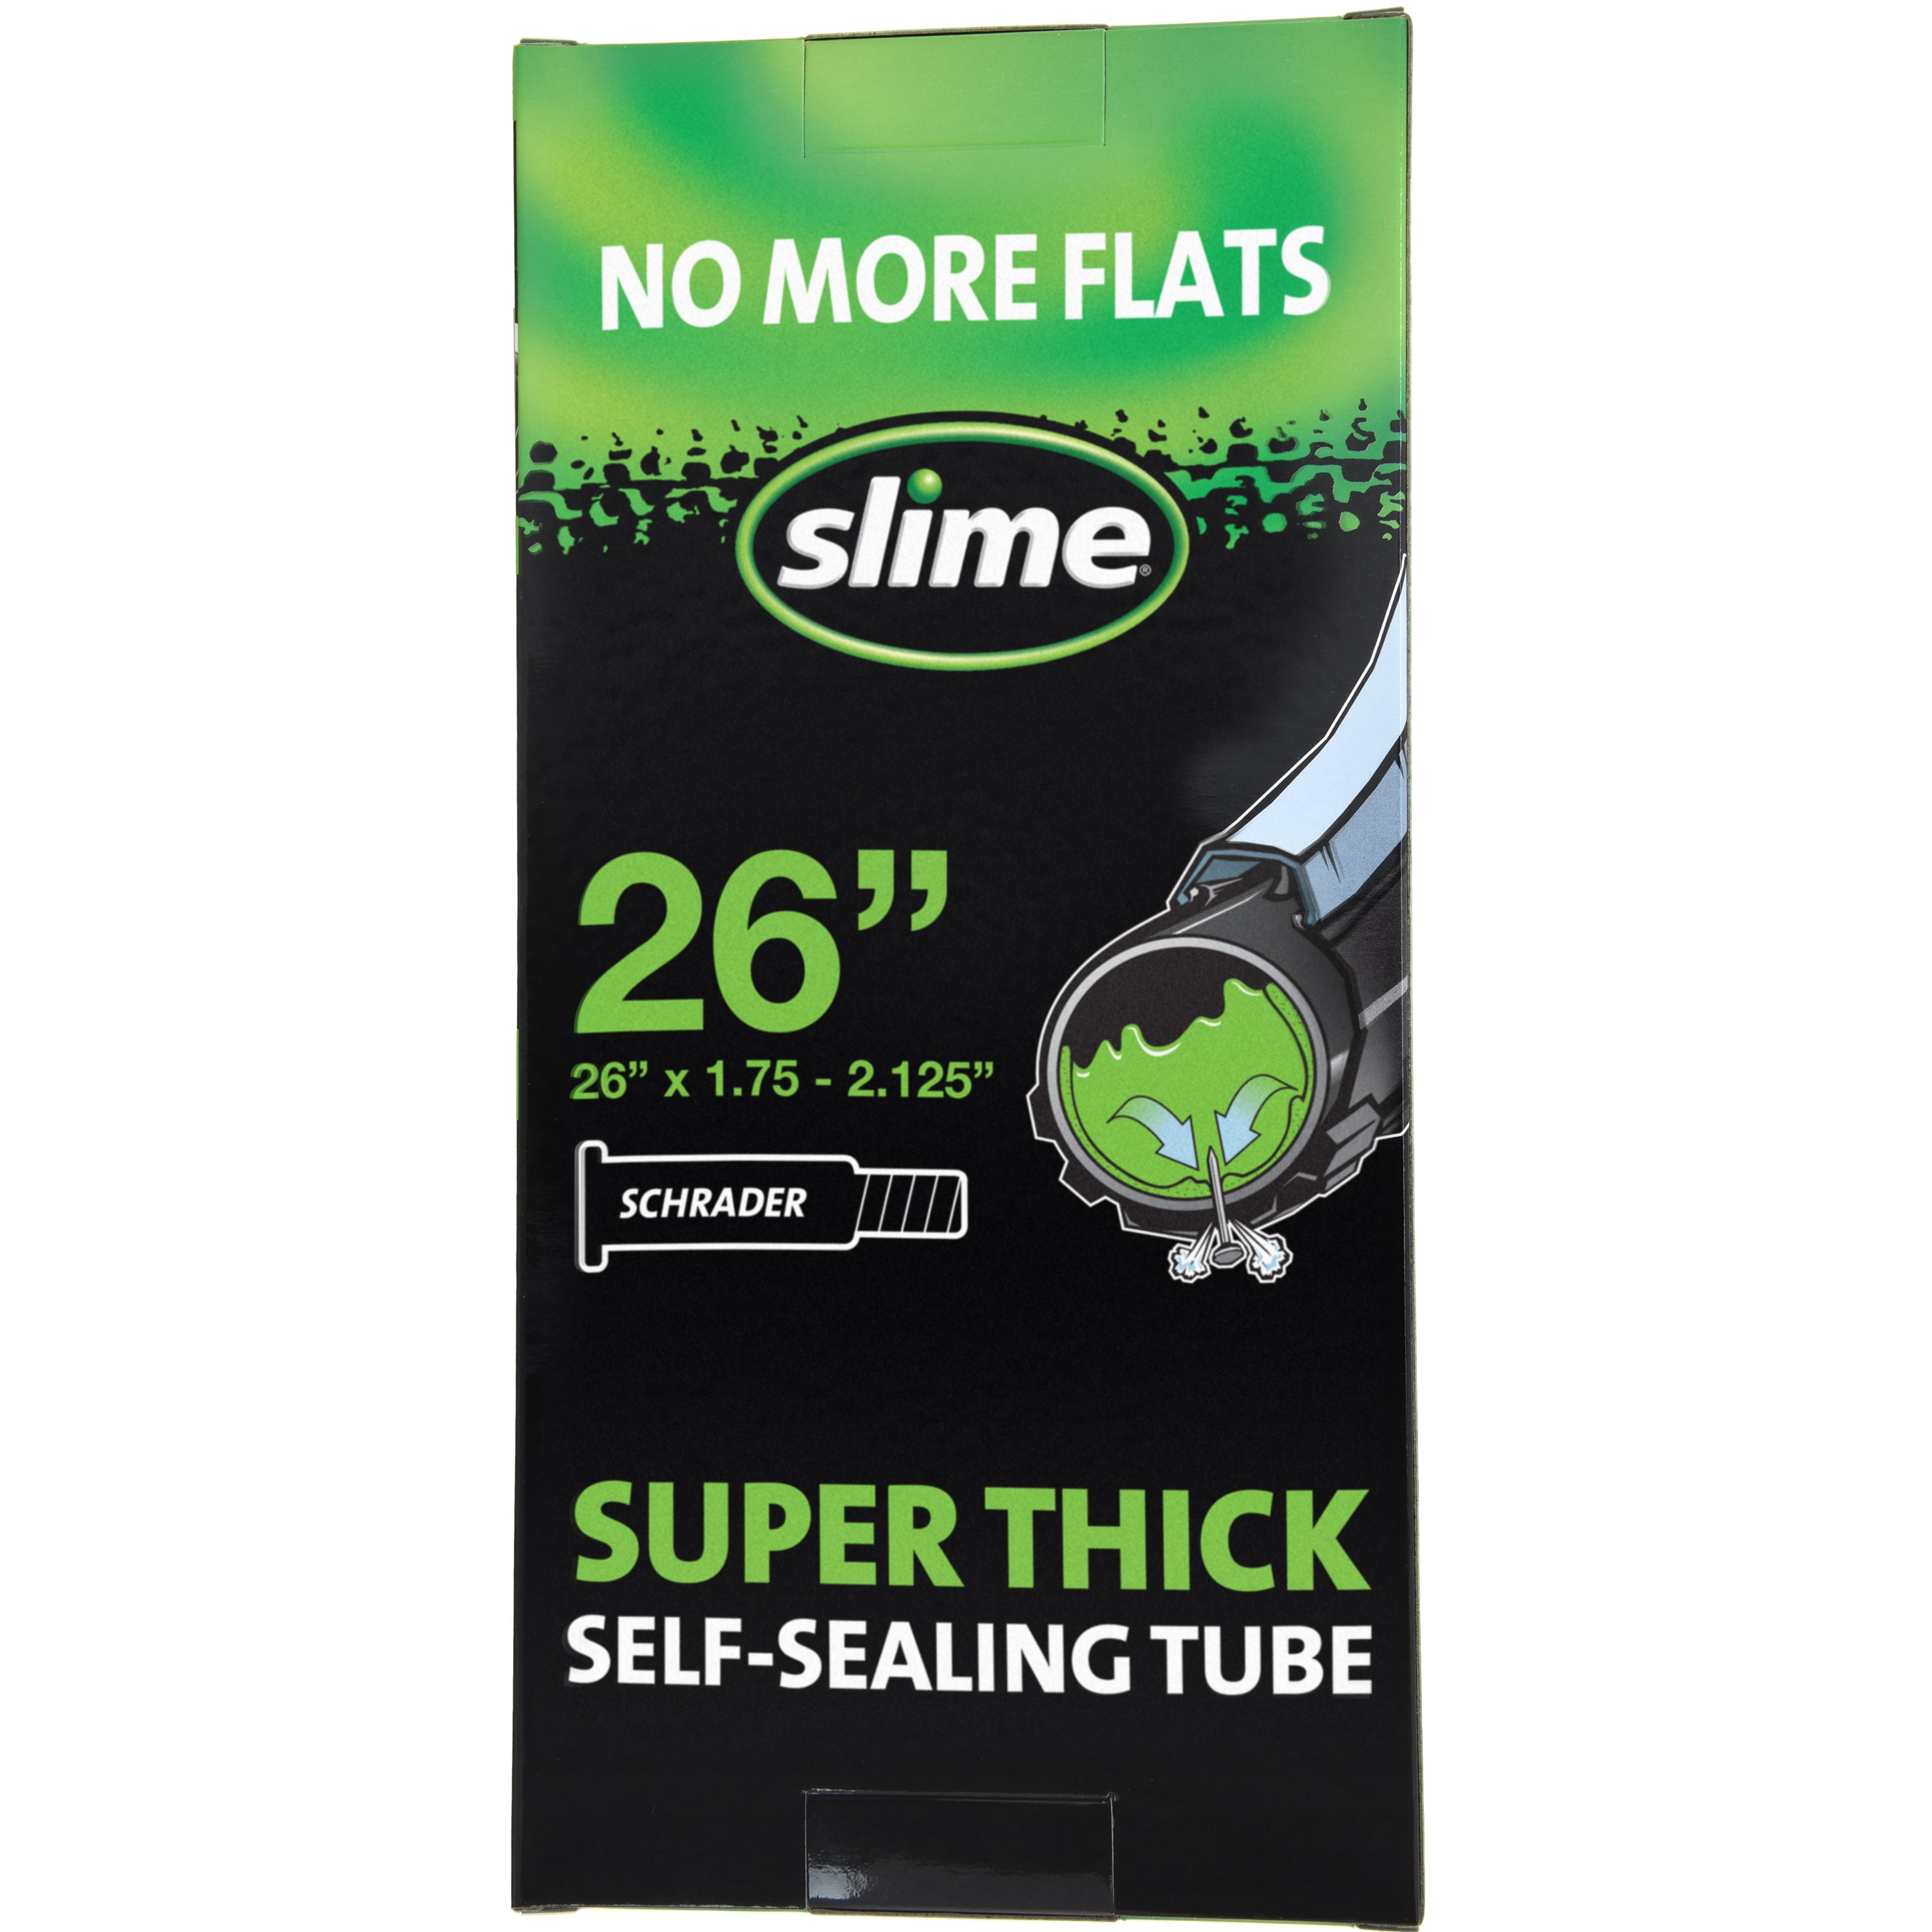 Slime 30045 26x 1.75-2.125 Self-Sealing Tube for sale online 